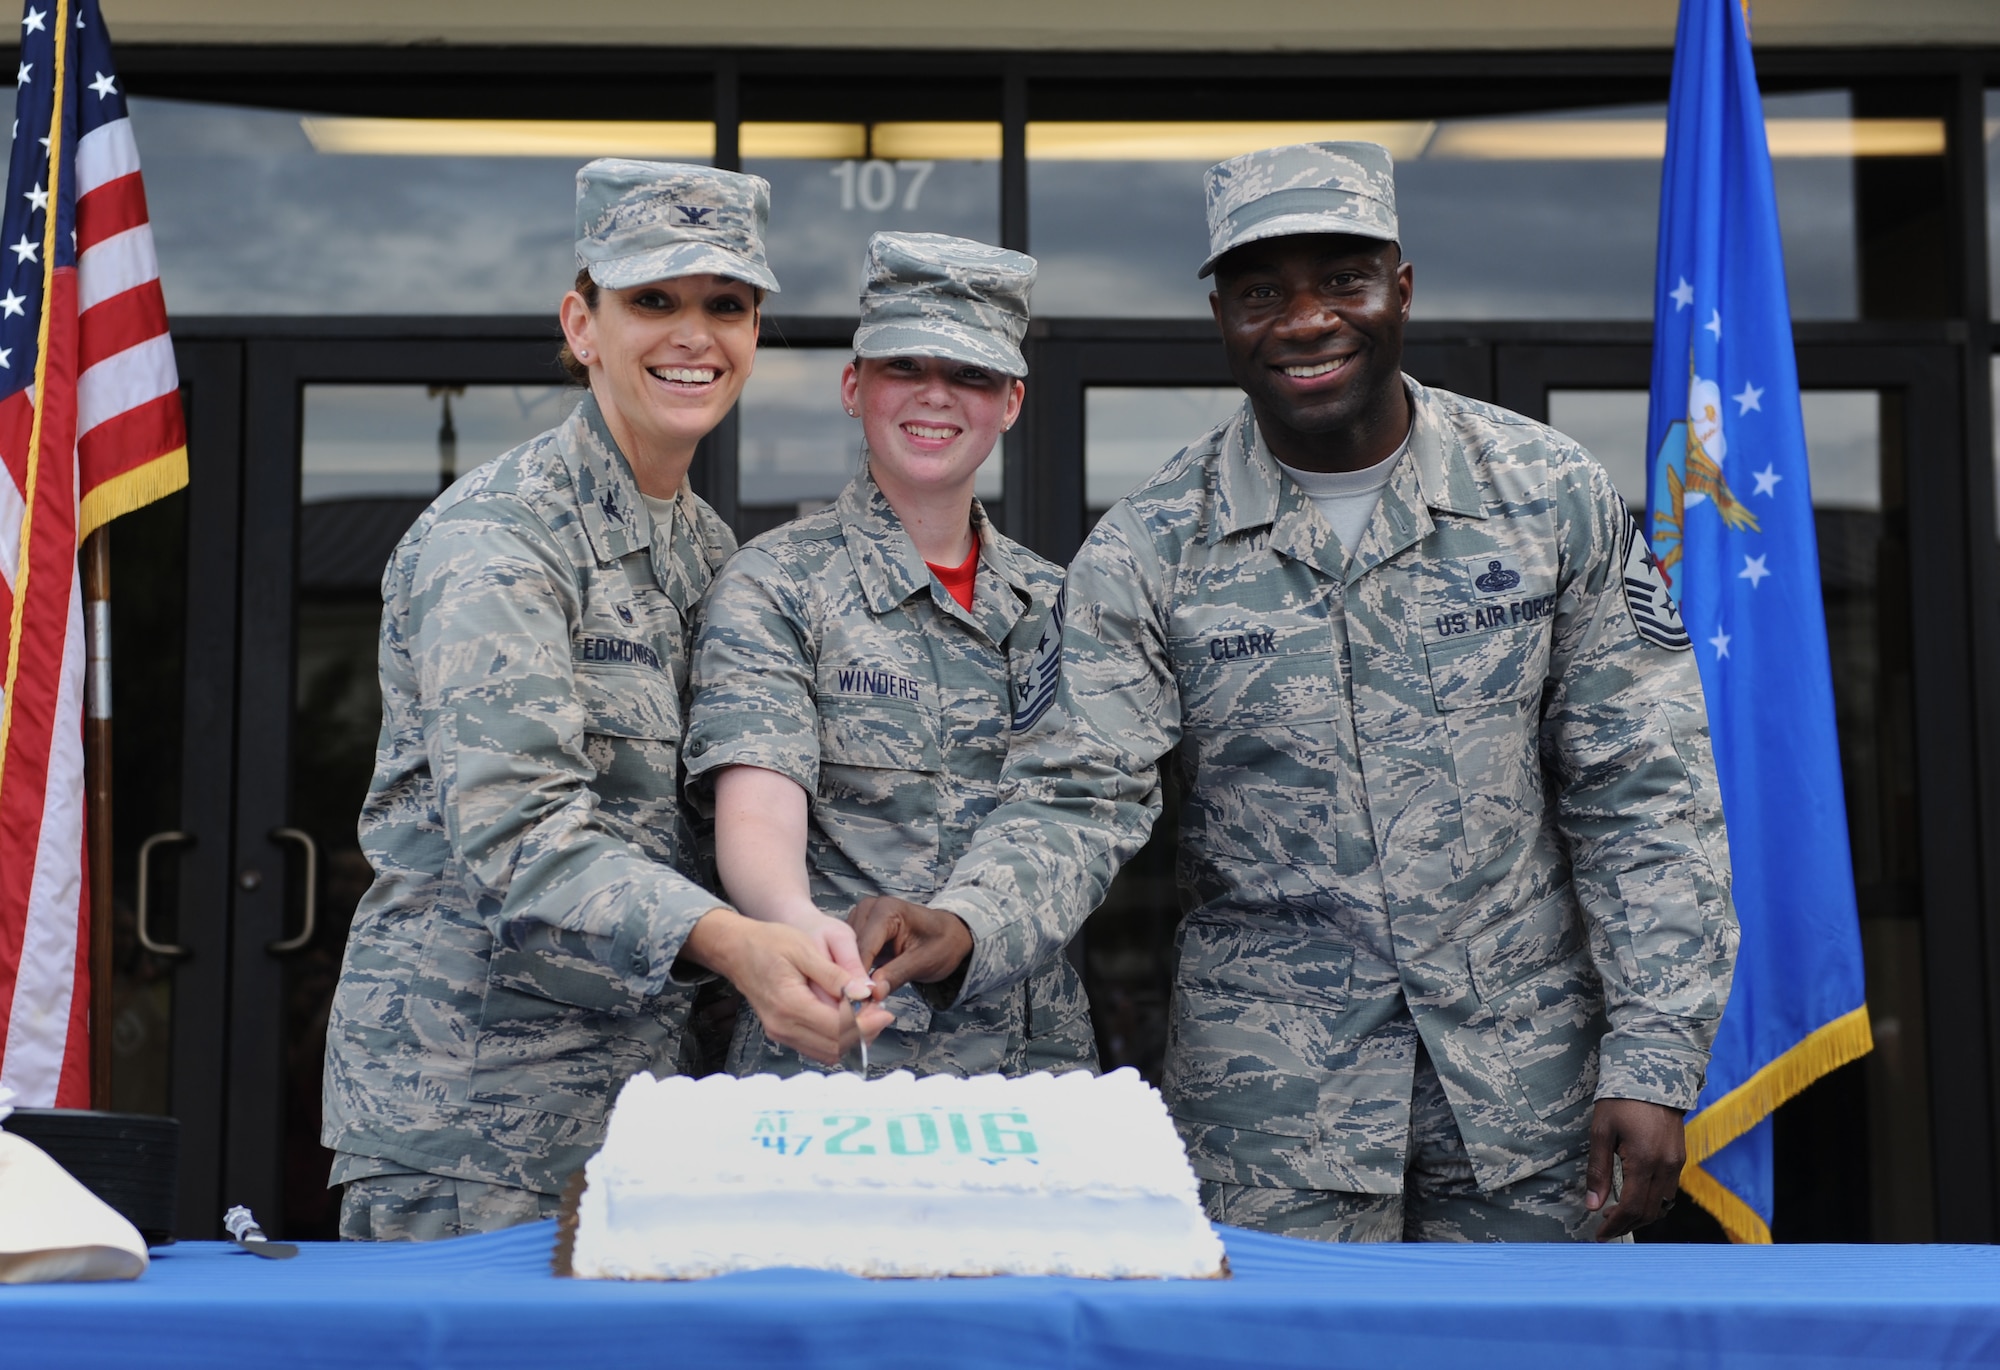 Col. Michele Edmondson, 81st Training Wing commander; Airman Basic Willow Winders, 336th Training Squadron student and the youngest Airman at Keesler, and Chief Master Sgt. Vegas Clark, 81st TRW command chief, pose for a photo while cutting the cake during Keesler’s Air Force birthday celebration in front of Vandenberg Hall Sept. 16, 2016, on Keesler Air Force Base, Miss. The event included a cake-cutting ceremony, music and food to celebrate the Air Force’s 69th birthday. The cake cutting ceremony is an Air Force tradition done performed by wing leadership and the youngest Airman on base. (U.S. Air Force photo by Kemberly Groue/Released)